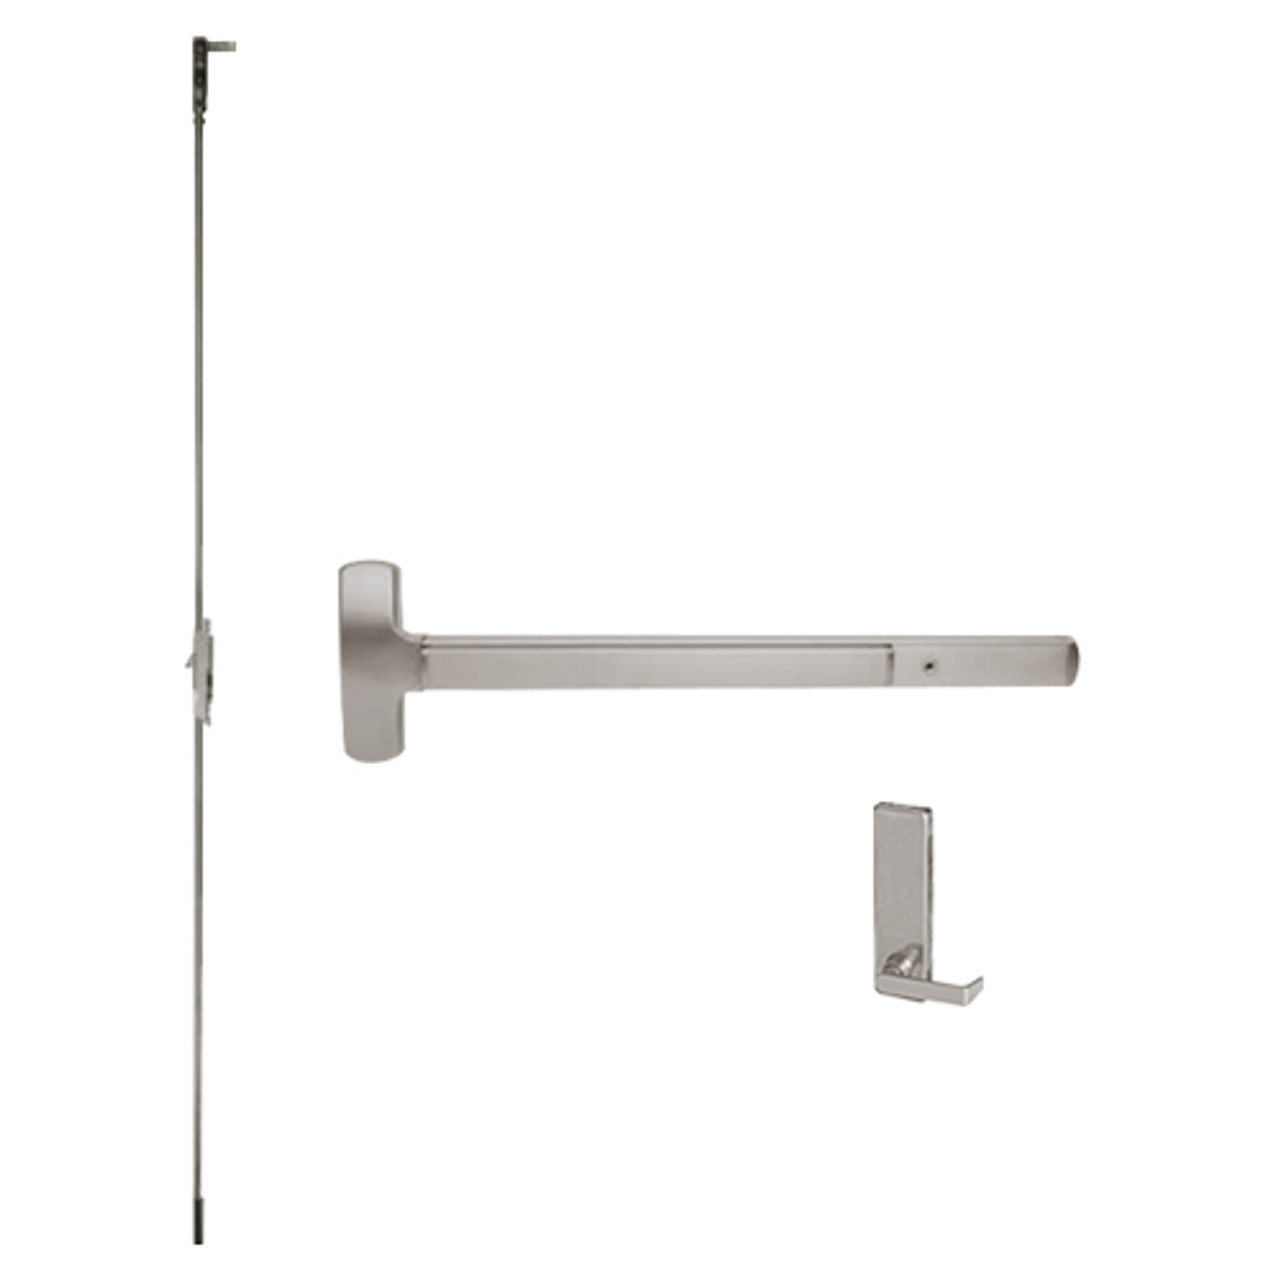 25-C-L-DT-DANE-US32D-2-LHR Falcon Exit Device in Satin Stainless Steel